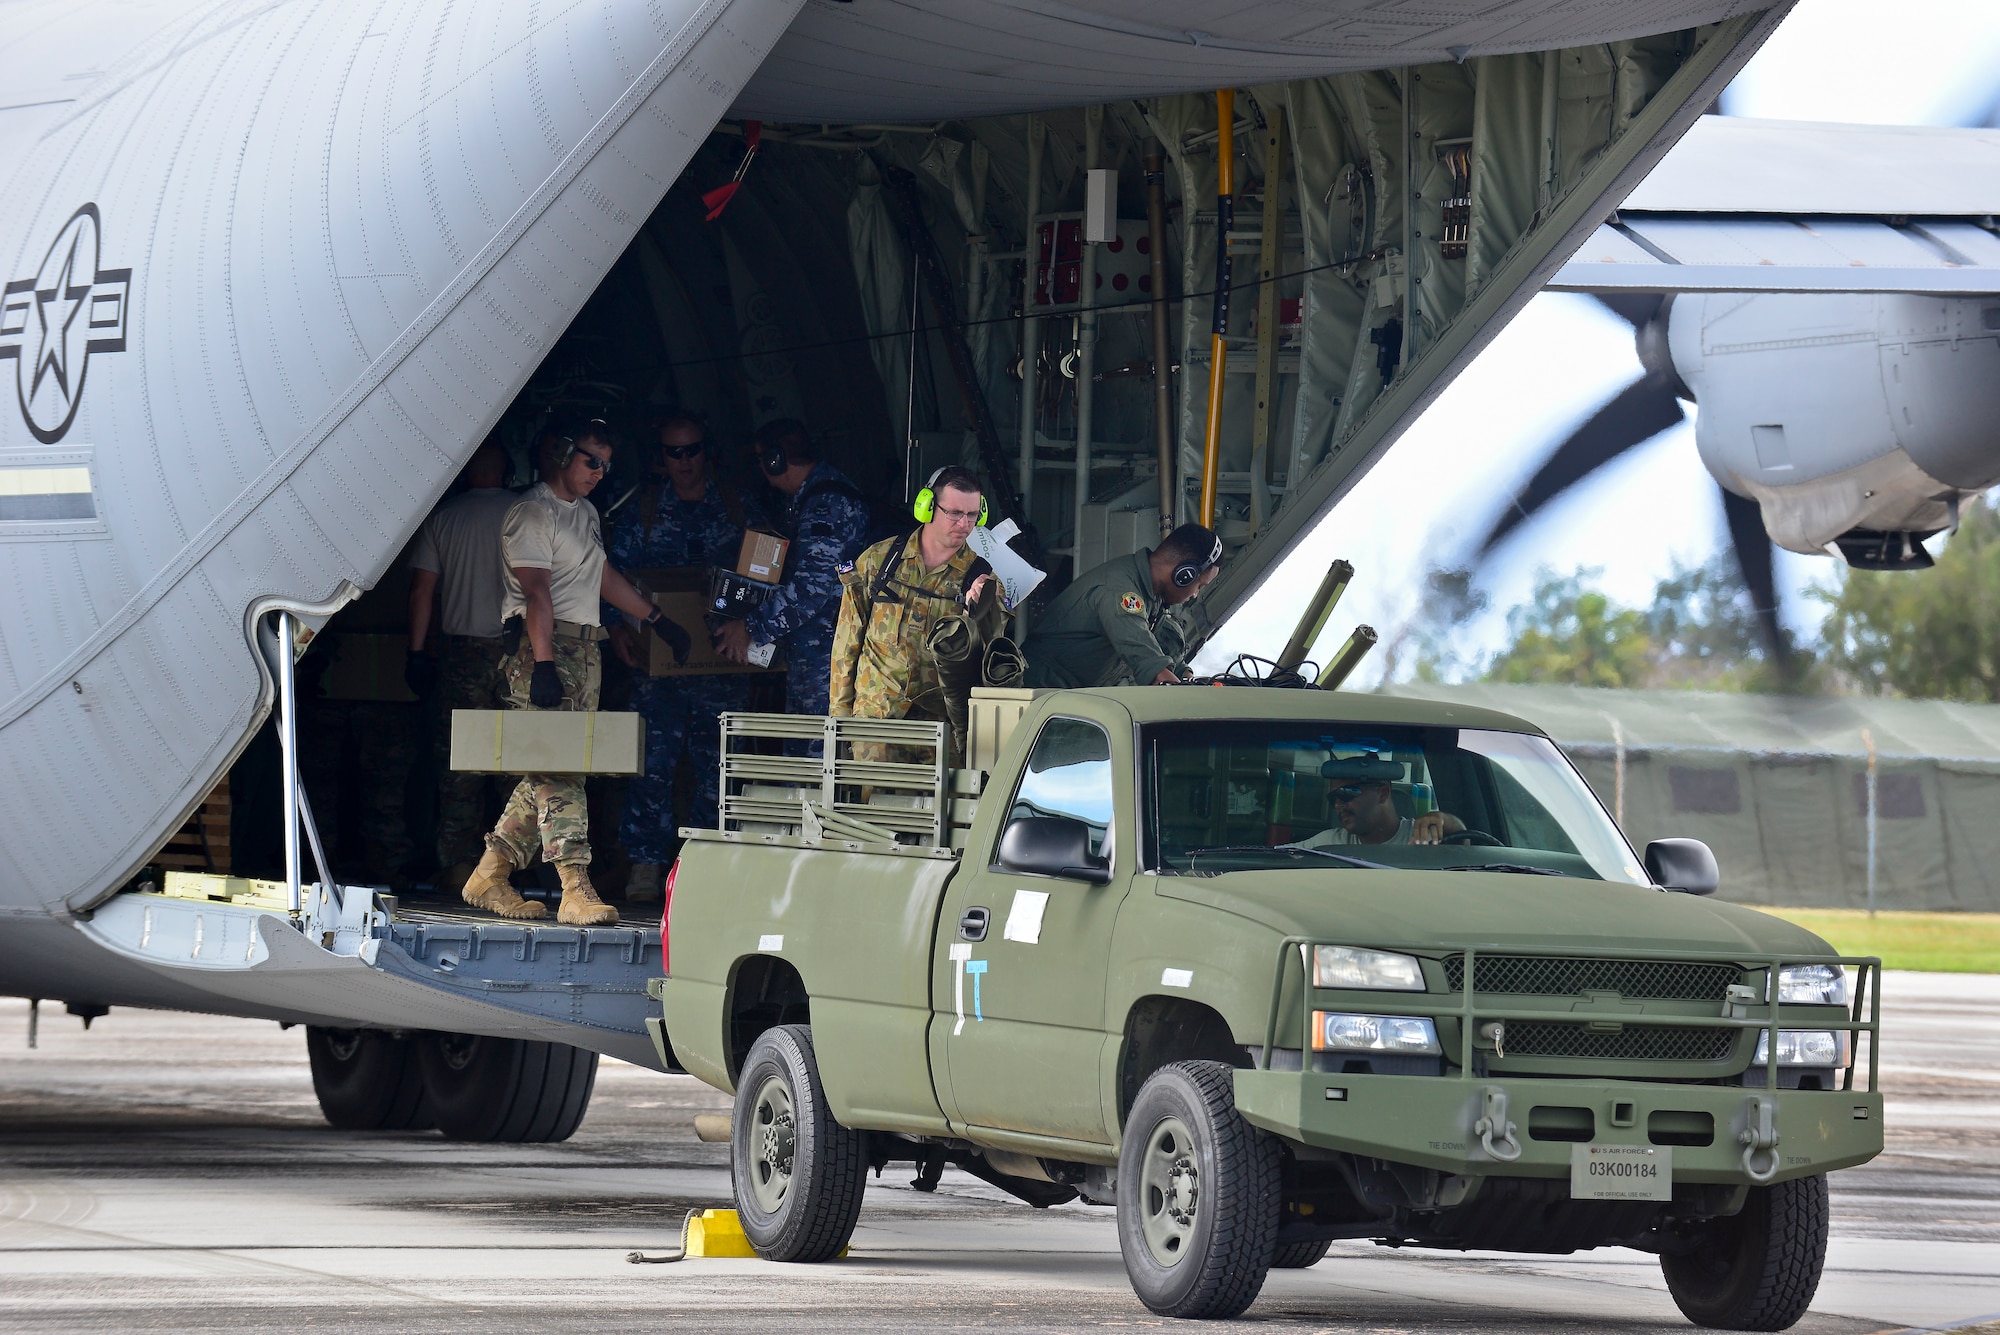 U.S. Air Force and Royal Australian Air Force humanitarian assistance/disaster relief (HA/DR) participants unload a USAF C-130J Super Hercules during exercise COPE NORTH 2018 at Rota, U.S. Commonwealth of the Northern Mariana Islands, Feb. 17. An annual exercise, this year's COPE NORTH is a multilateral HA/DR exercise that allows participating nations to prepare for and recover from the devastating effects of natural disasters. (U.S. Air Force photo by Airman 1st Class Christopher Quail)